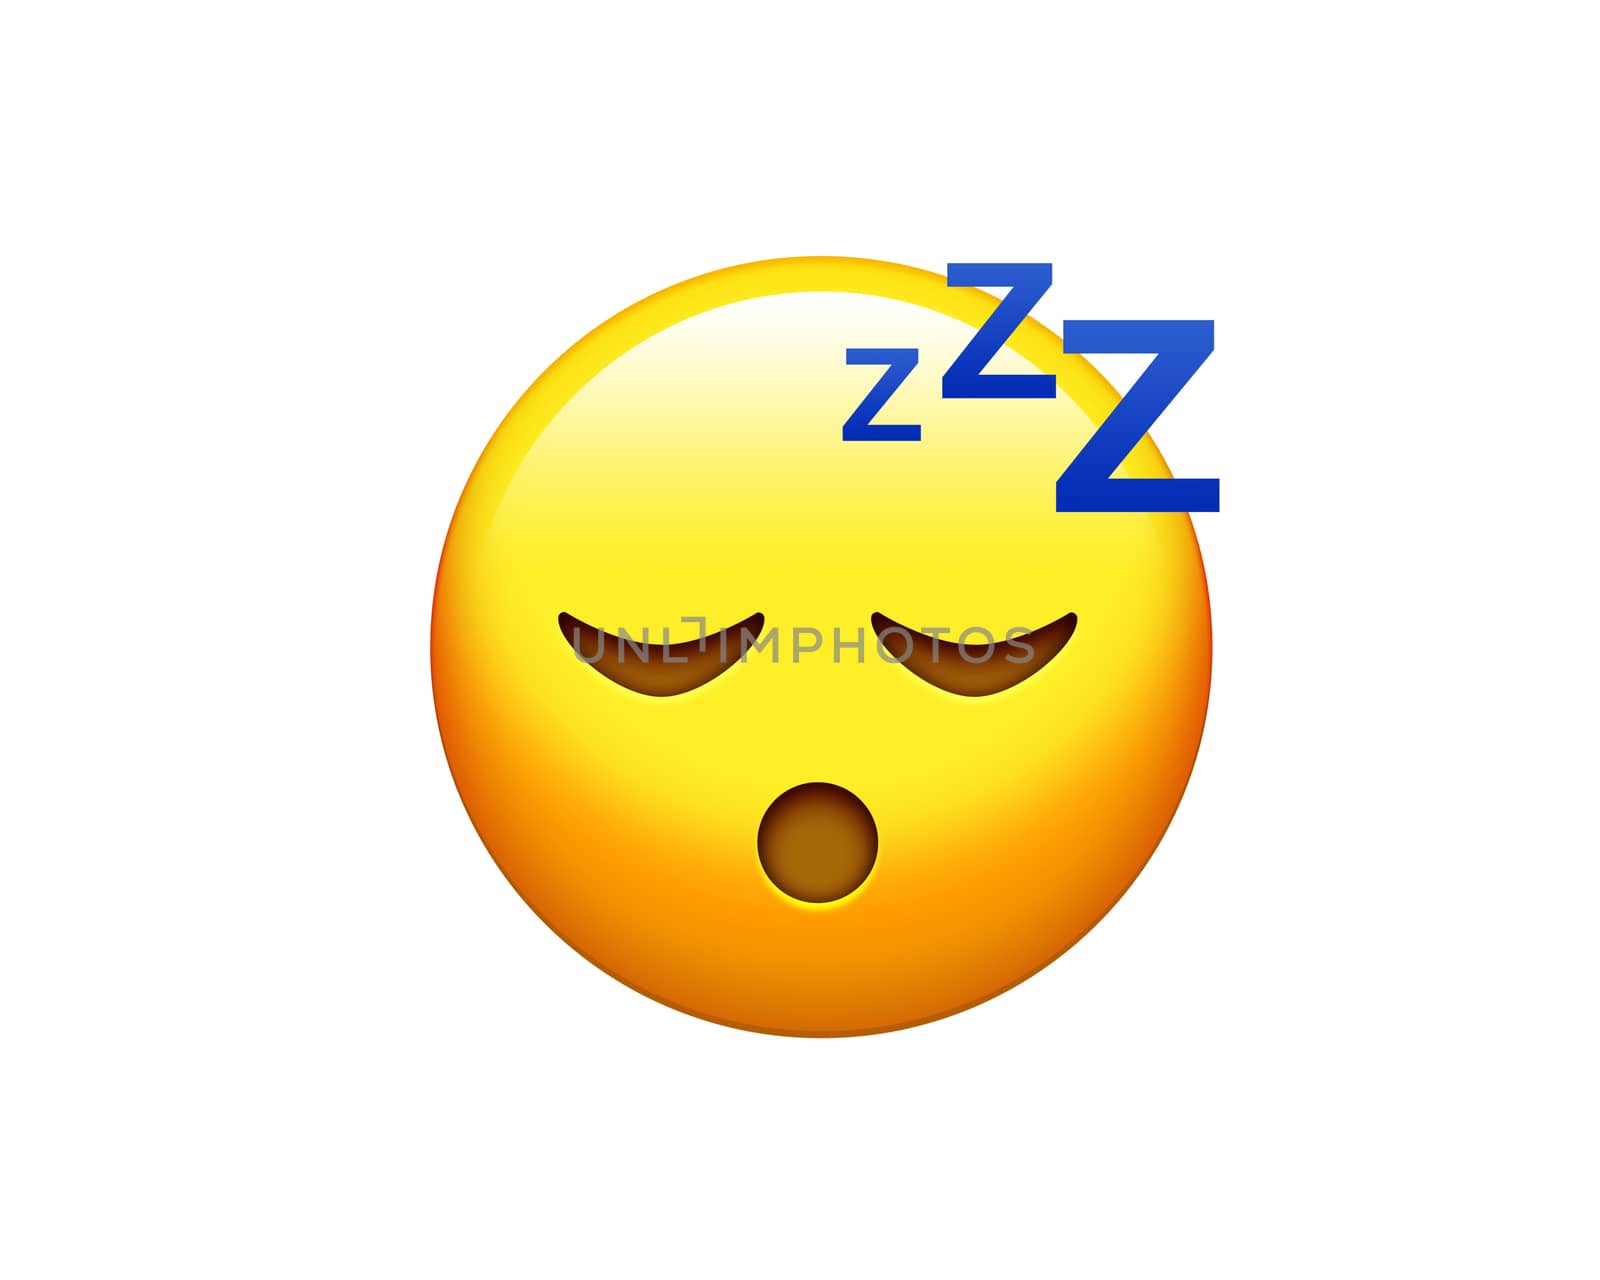 The isolated yellow sleepy face with closing eyes icon